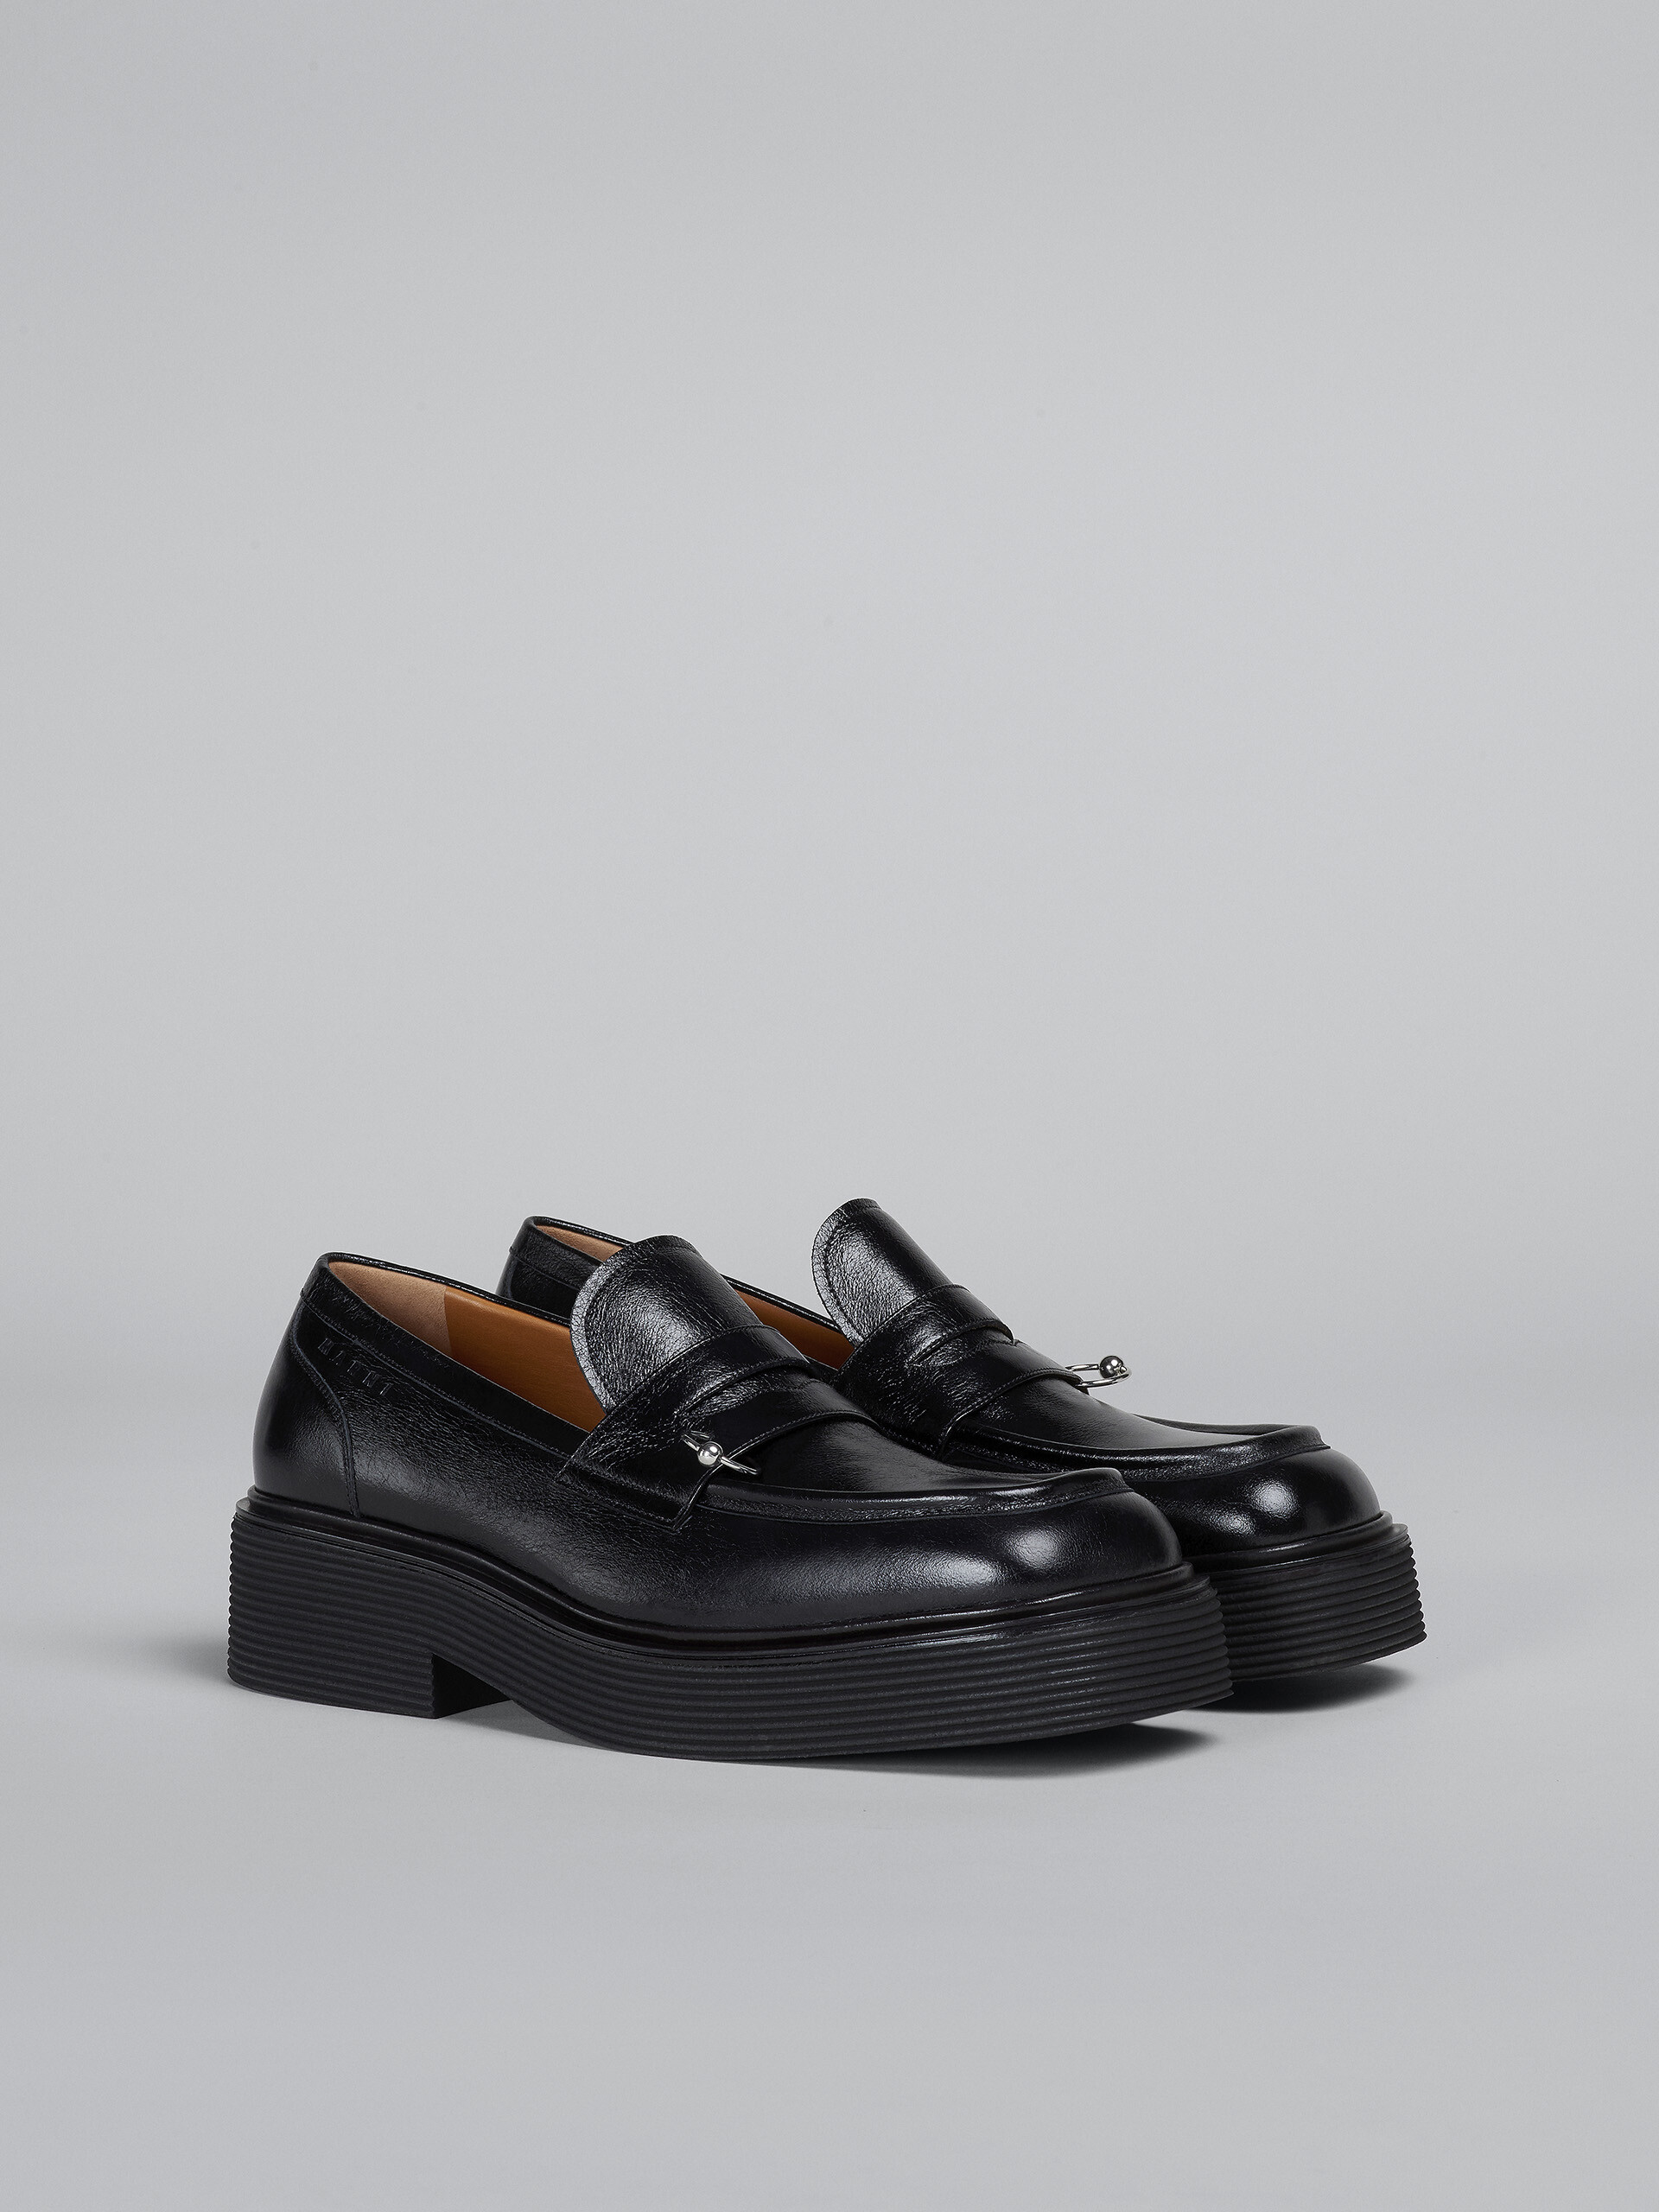 Marni Croco Leather Mocassin in Black Womens Shoes Flats and flat shoes Loafers and moccasins 